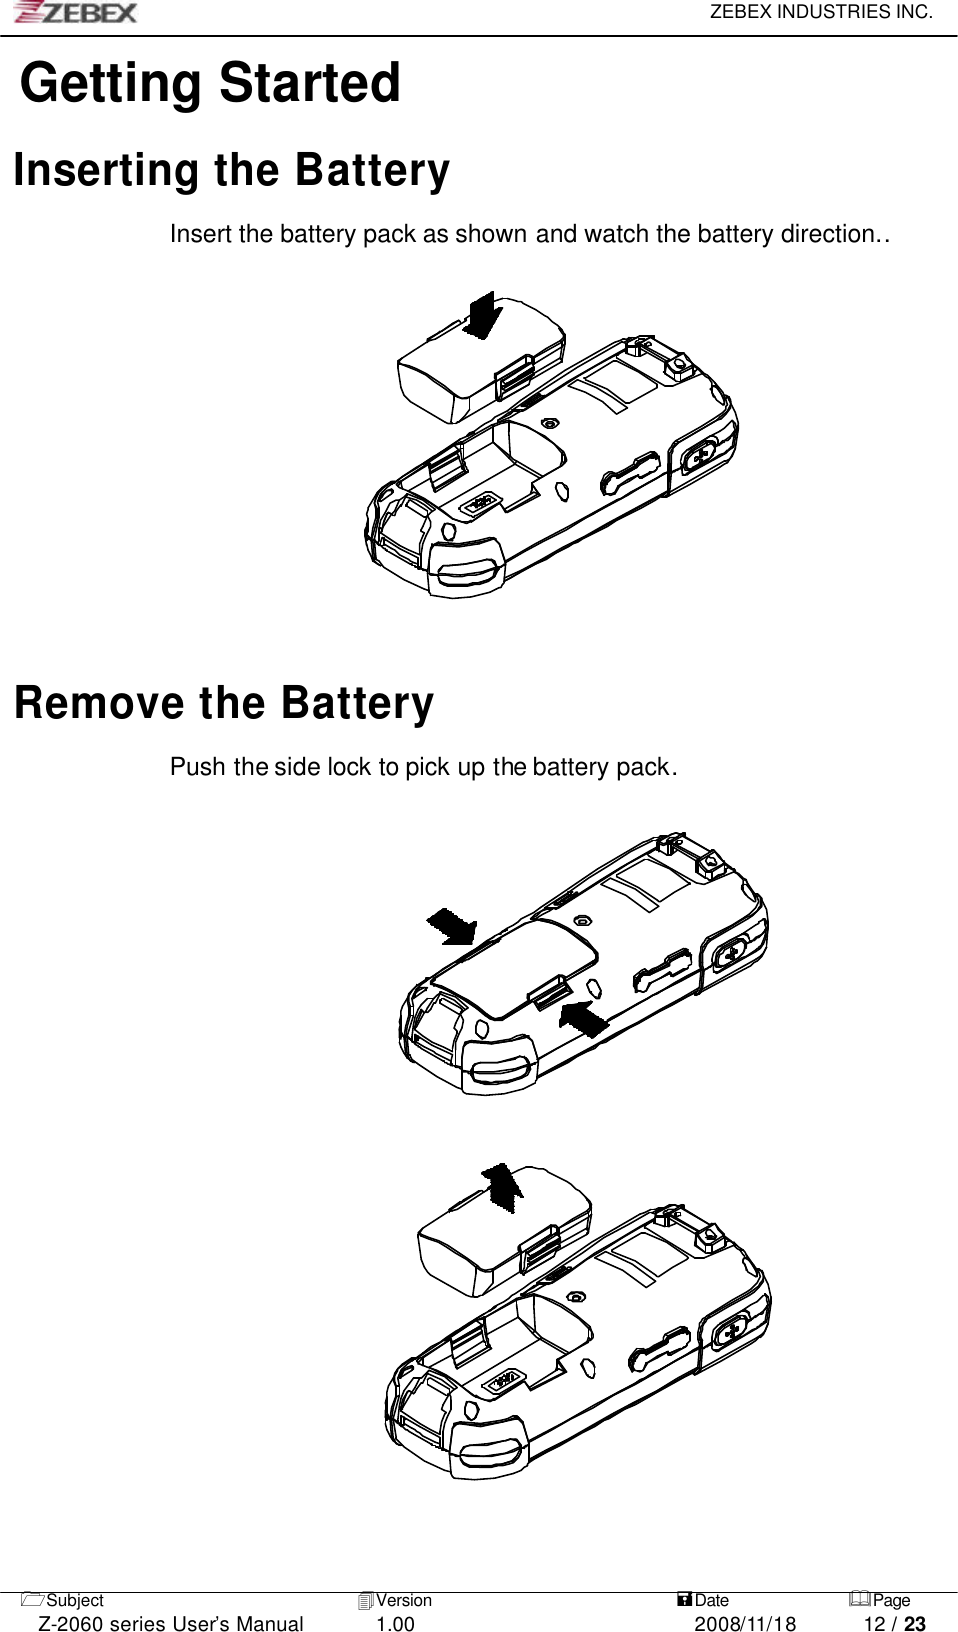     ZEBEX INDUSTRIES INC.   1Subject 4Version   =Date &amp;Page  Z-2060 series User’s Manual 1.00 2008/11/18 12 / 23 Getting Started  Inserting the Battery  Insert the battery pack as shown and watch the battery direction..                Remove the Battery  Push the side lock to pick up the battery pack.                                                      